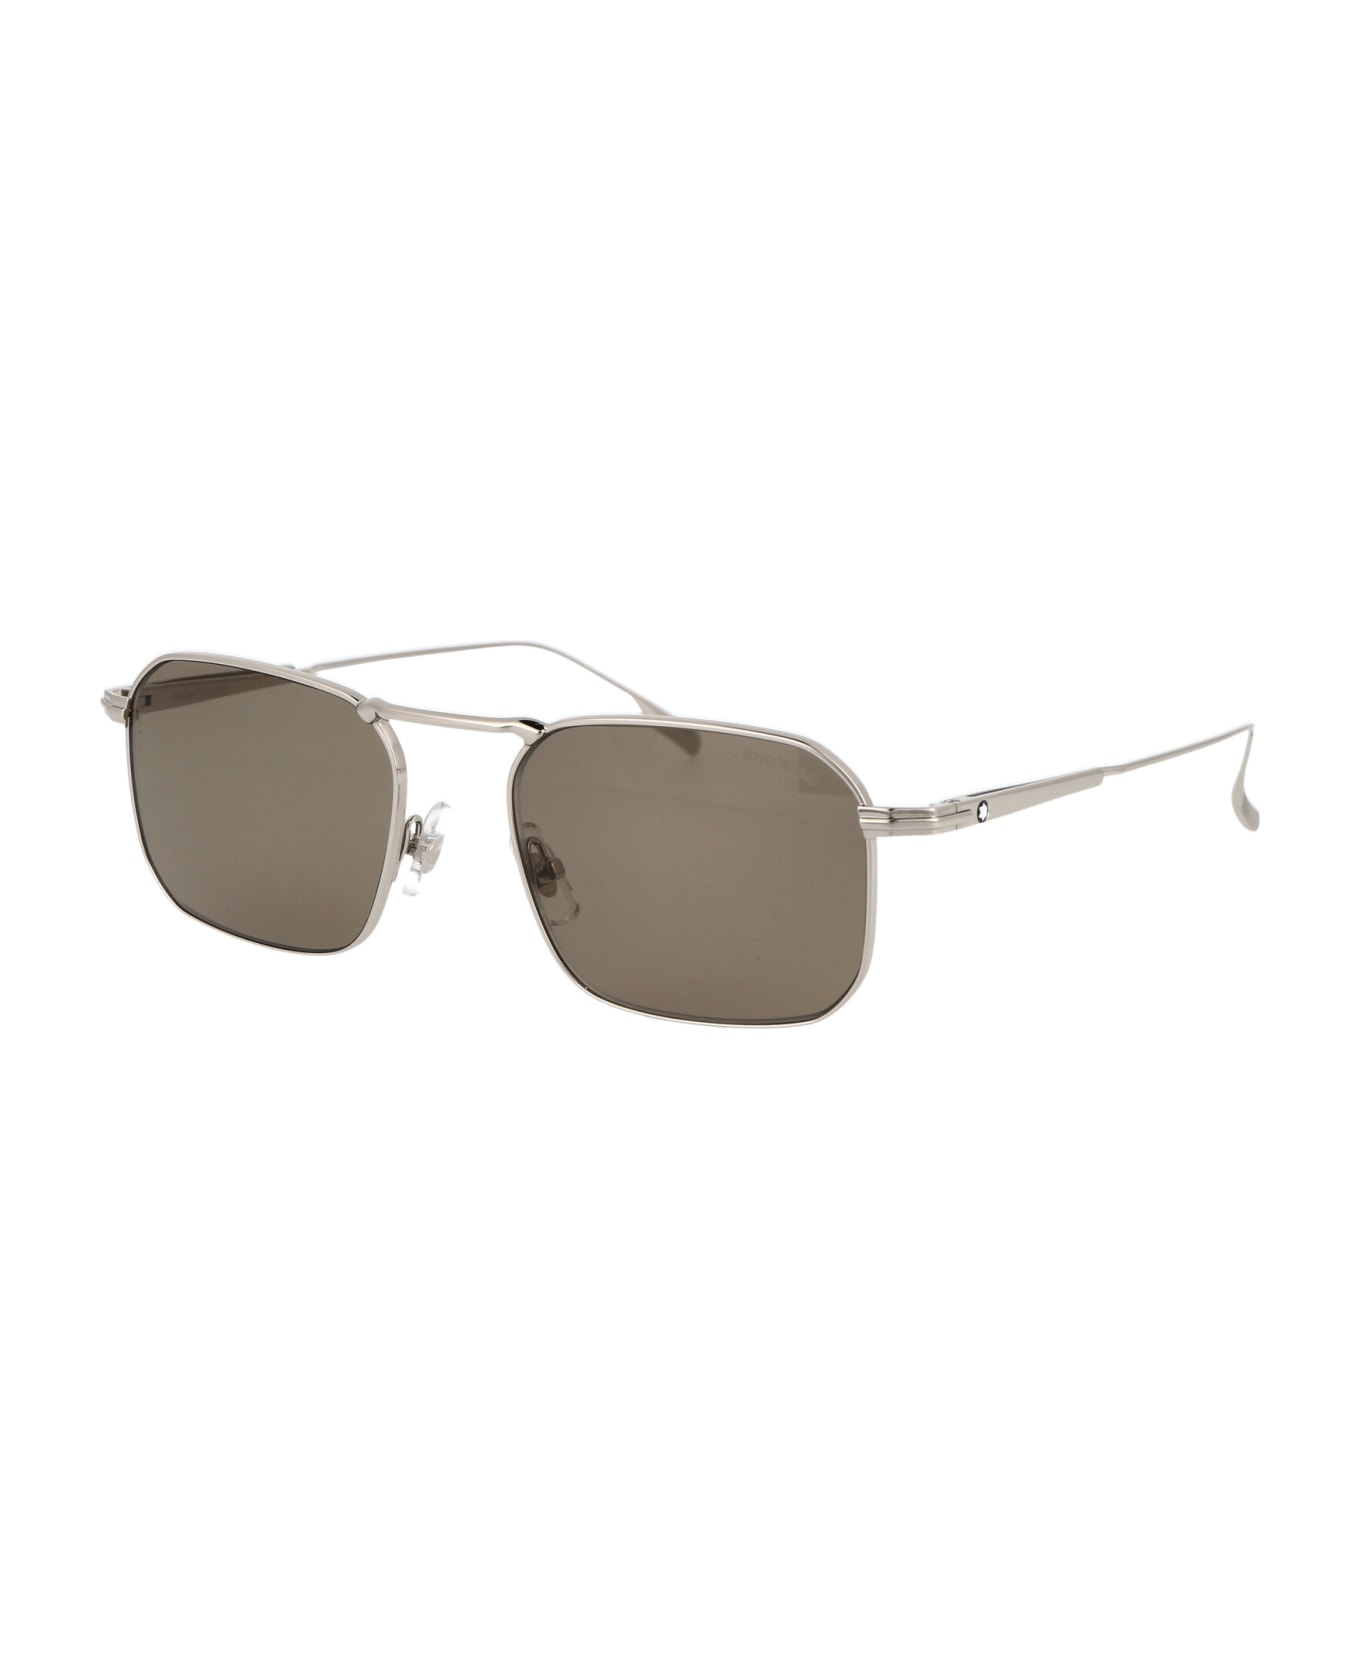 Montblanc Mb0218s Sunglasses - 003 SILVER SILVER BROWN